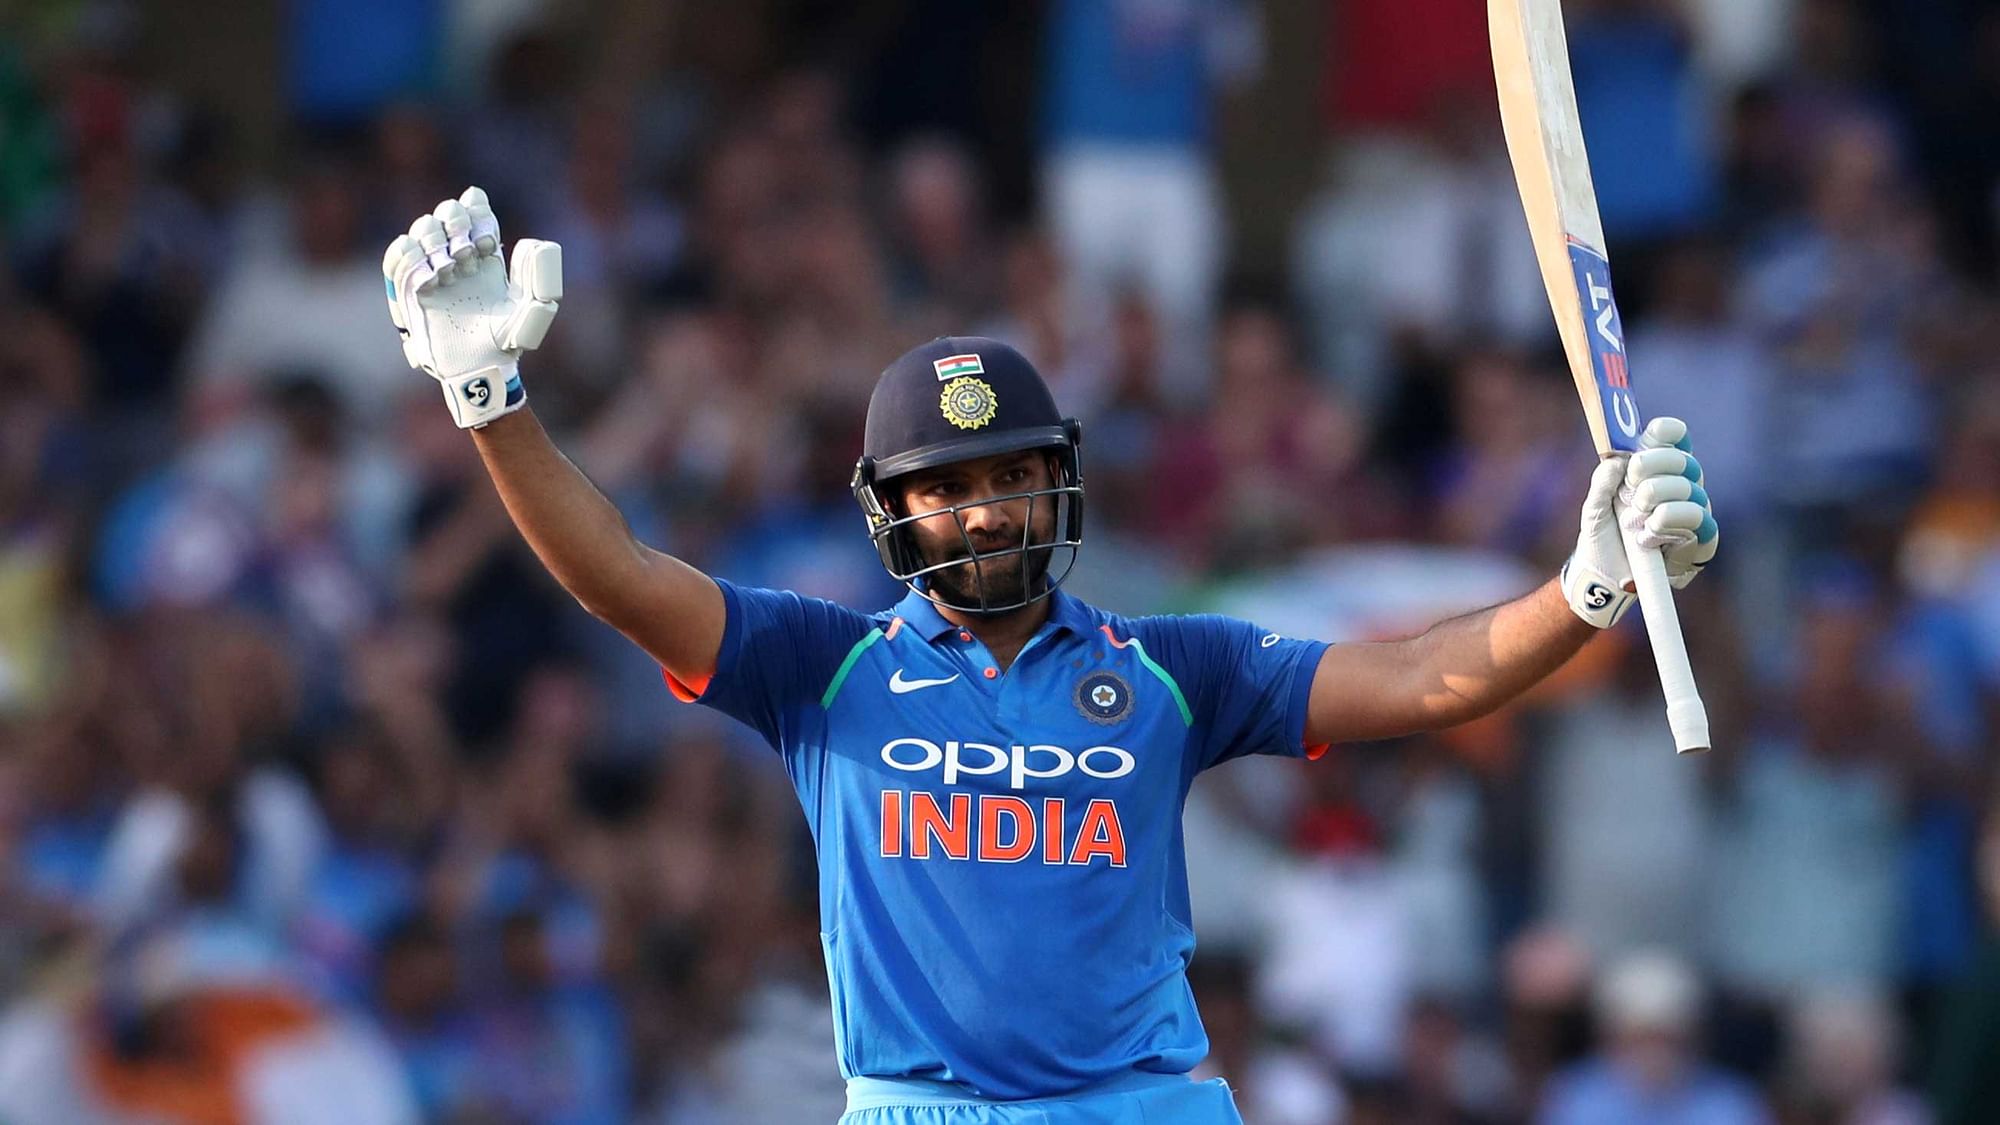 India’s Rohit Sharma celebrates reaching his century against England in the opening ODI